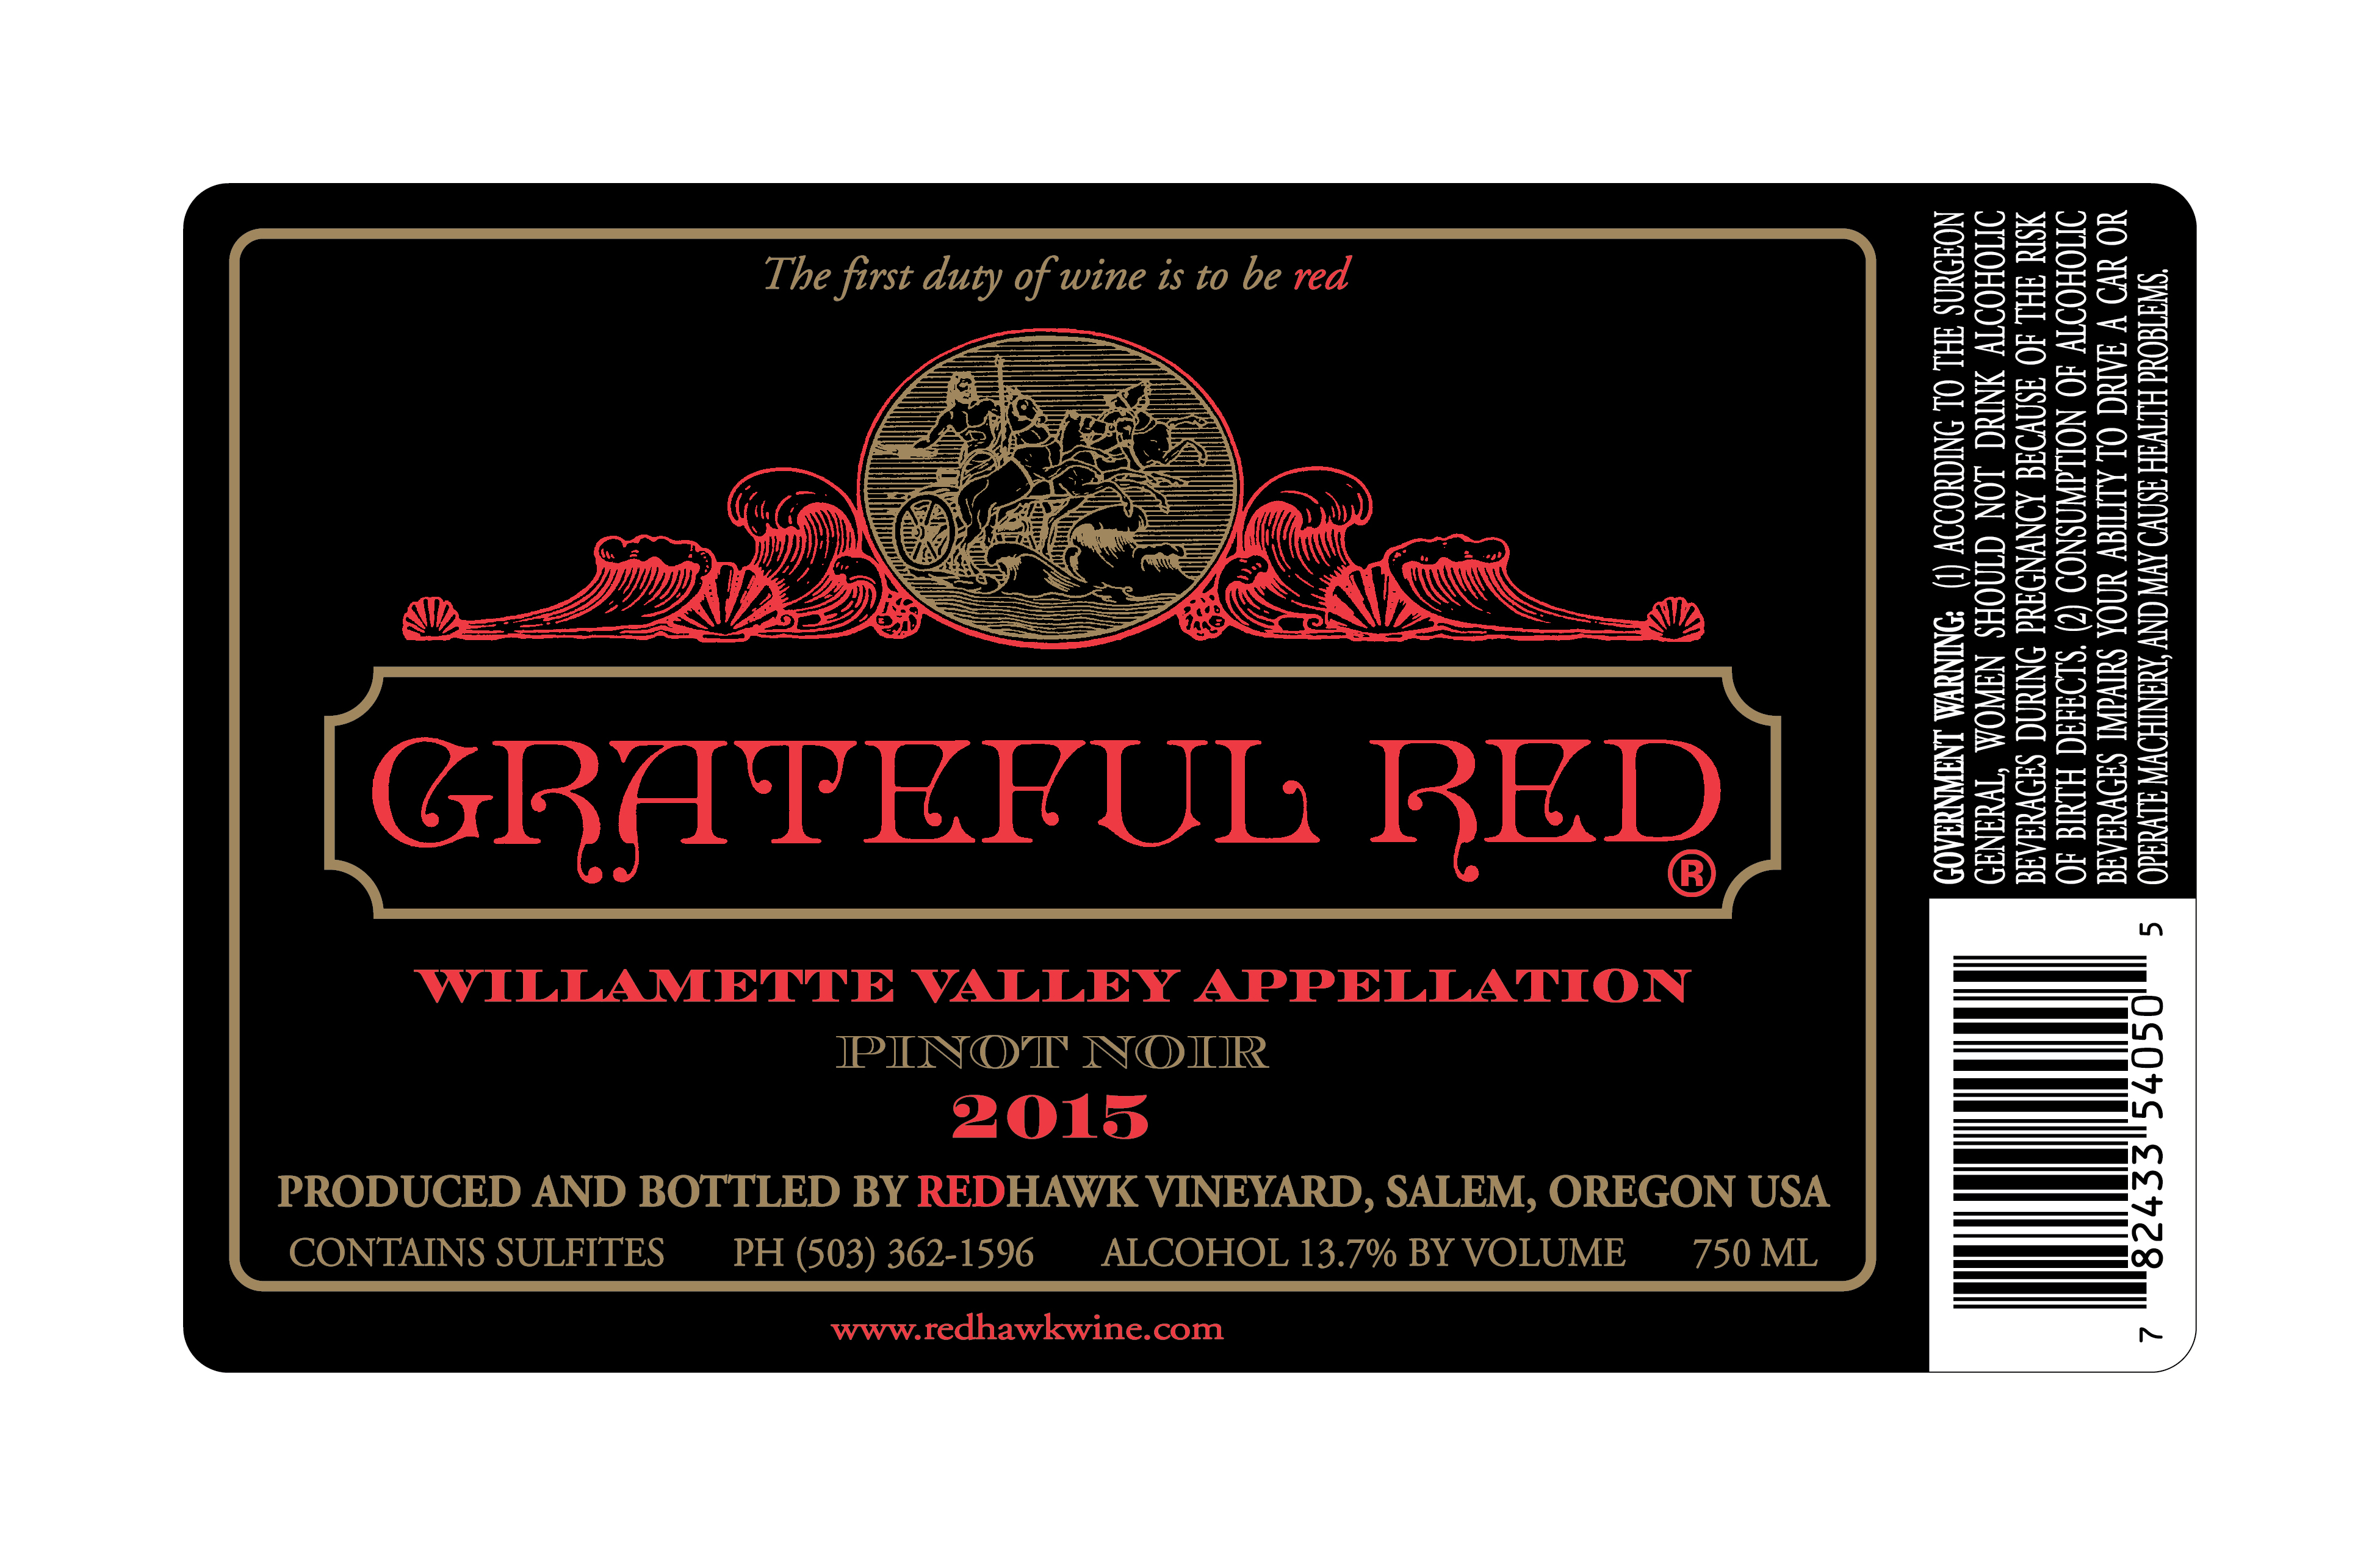 Product Image for 2019 Grateful Red Pinot Noir